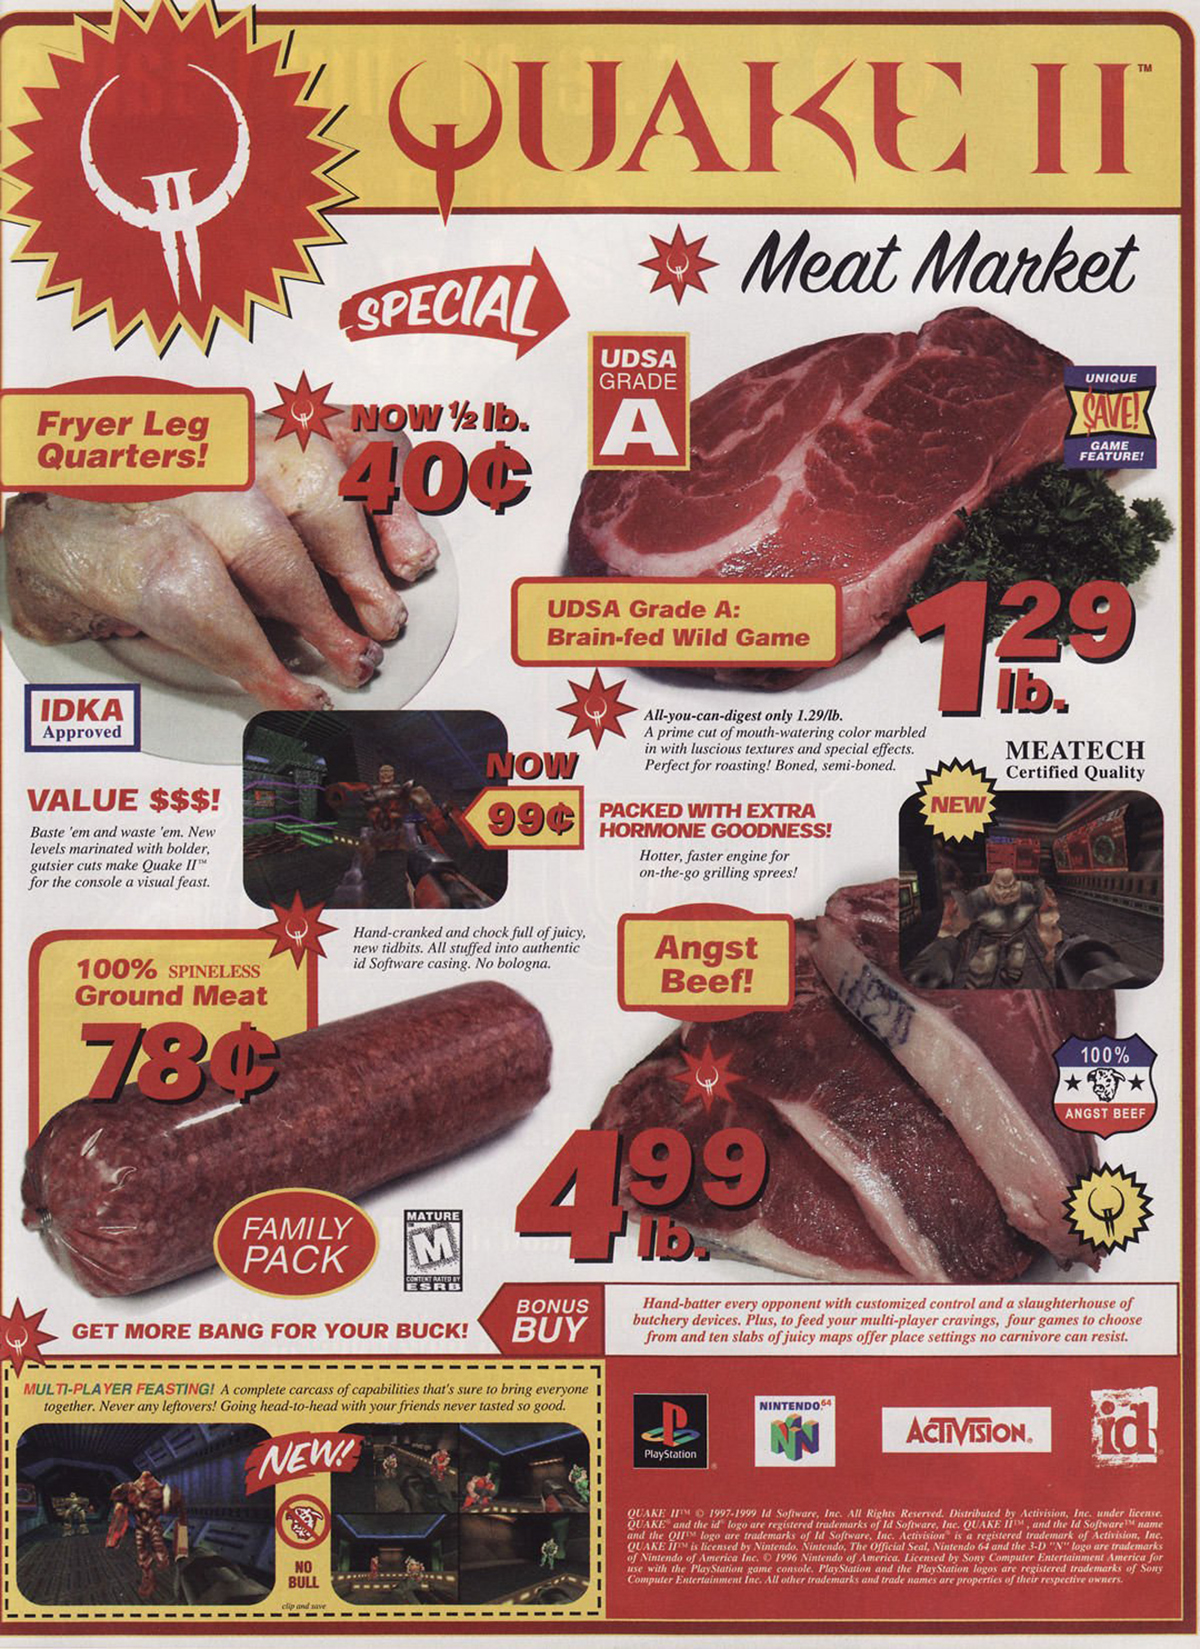 quake 2 ads - Fryer Leg Quarters! Idka Apprened Value Sss! 100% Ground Meat 789 Special NOWb. A 40 Quake It Meat Market Shandy Family Pack New! M Get More Bang For Your Buck! Udsa Grade A Brainfed Wild Game Now 99 Udsa Grace Bonus Buy Packed With Extra An